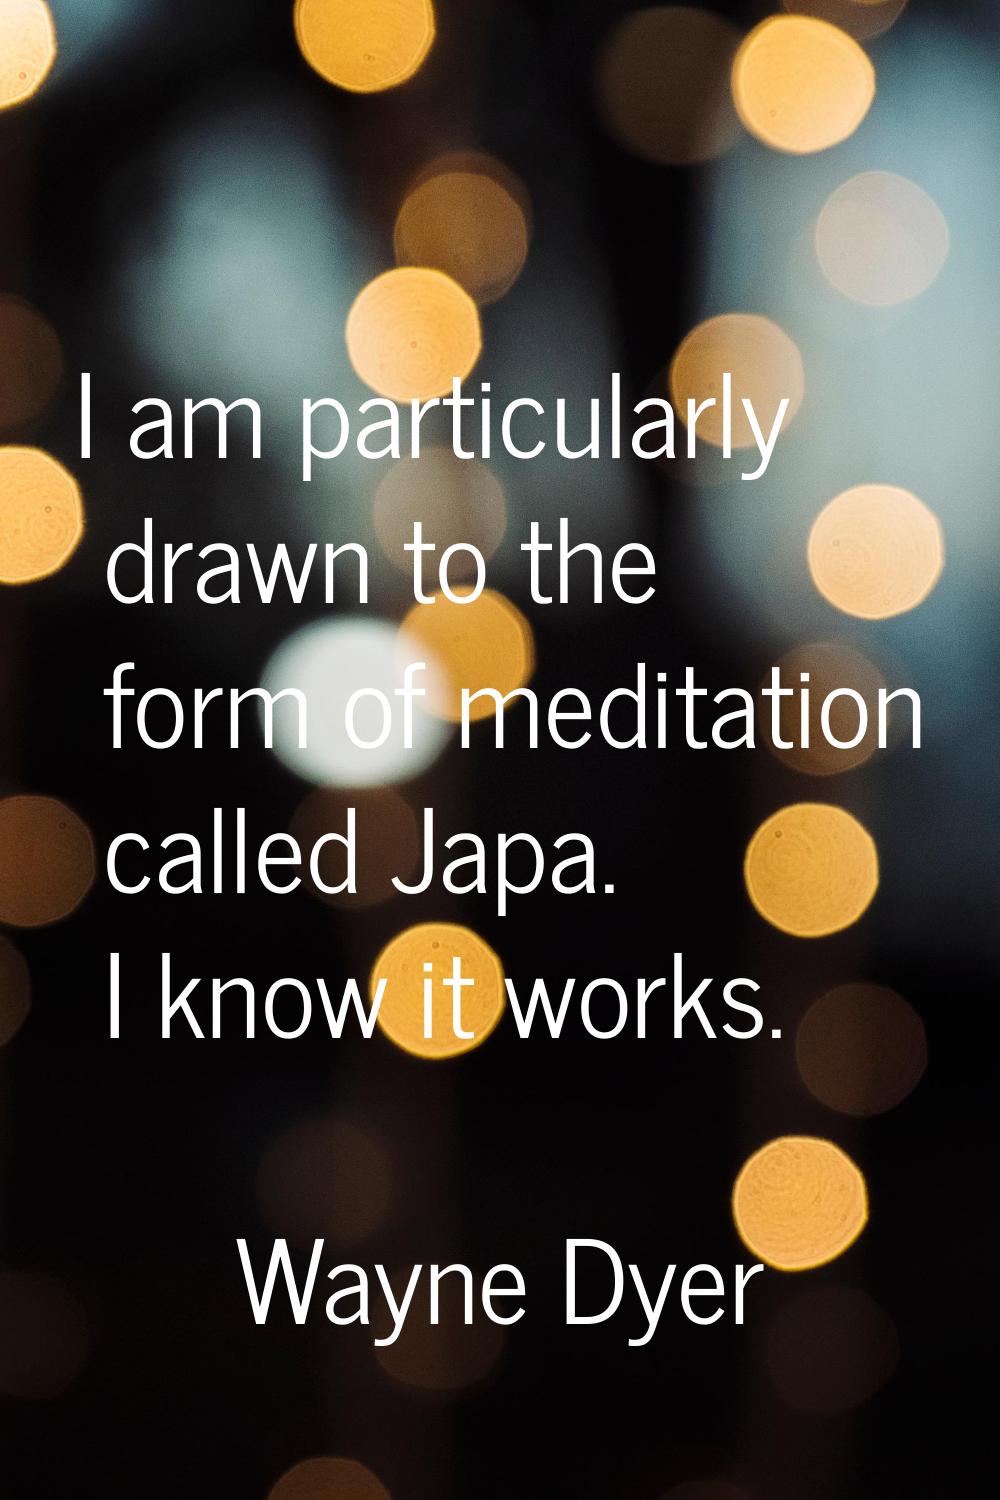 I am particularly drawn to the form of meditation called Japa. I know it works.